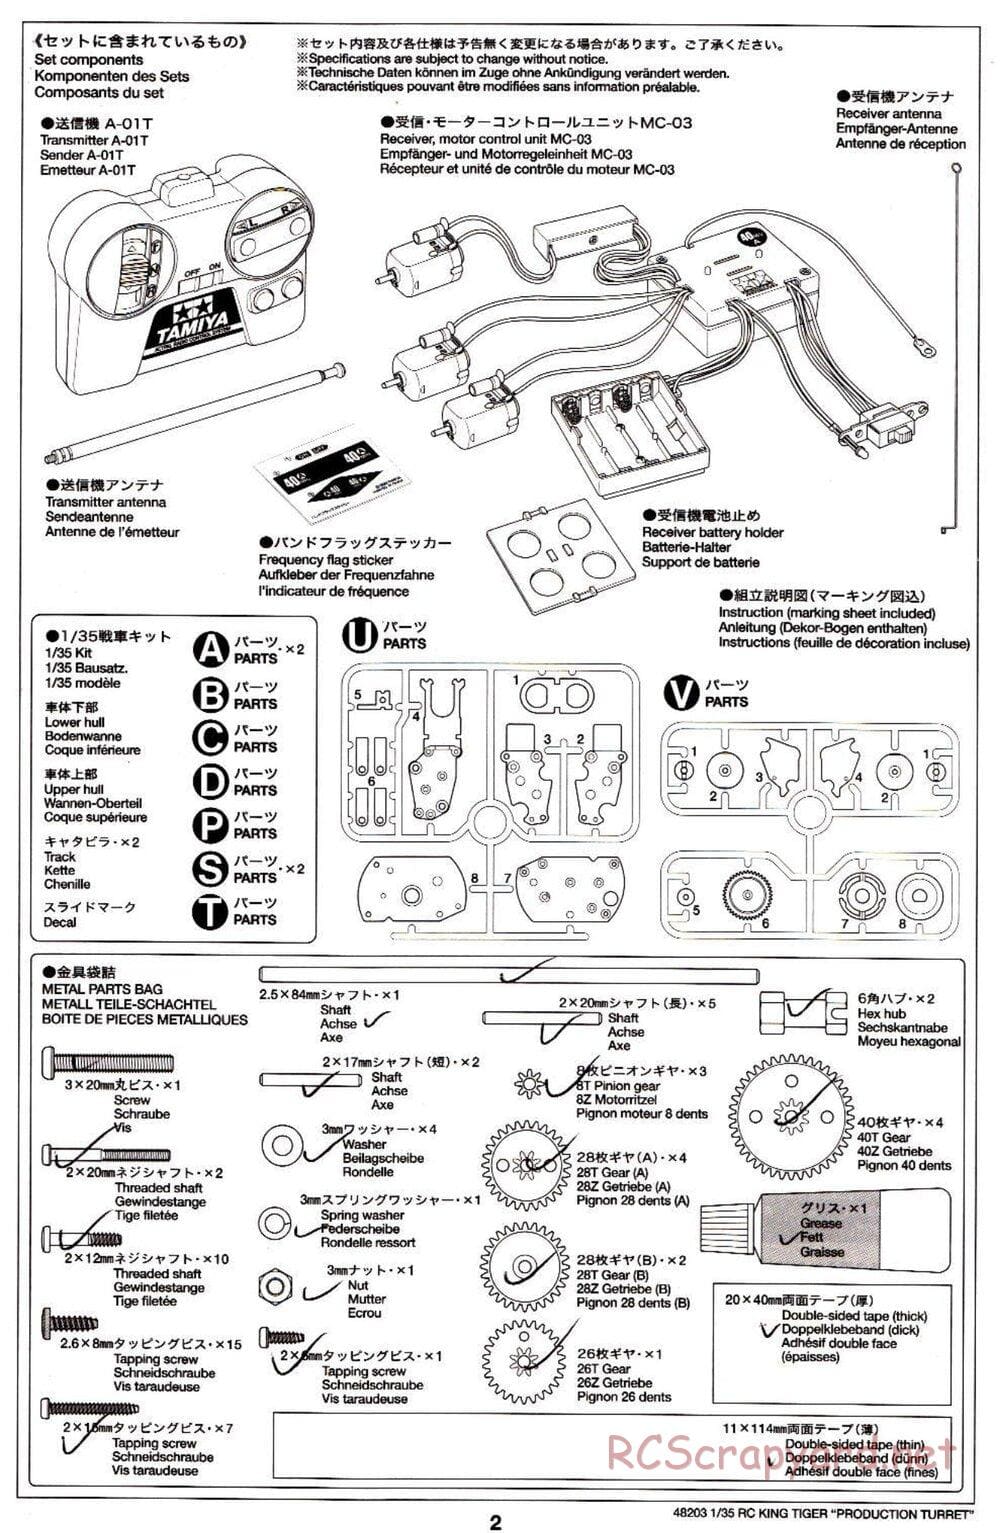 Tamiya - German King Tiger (Production Turret) - 1/35 Scale Chassis - Manual - Page 2